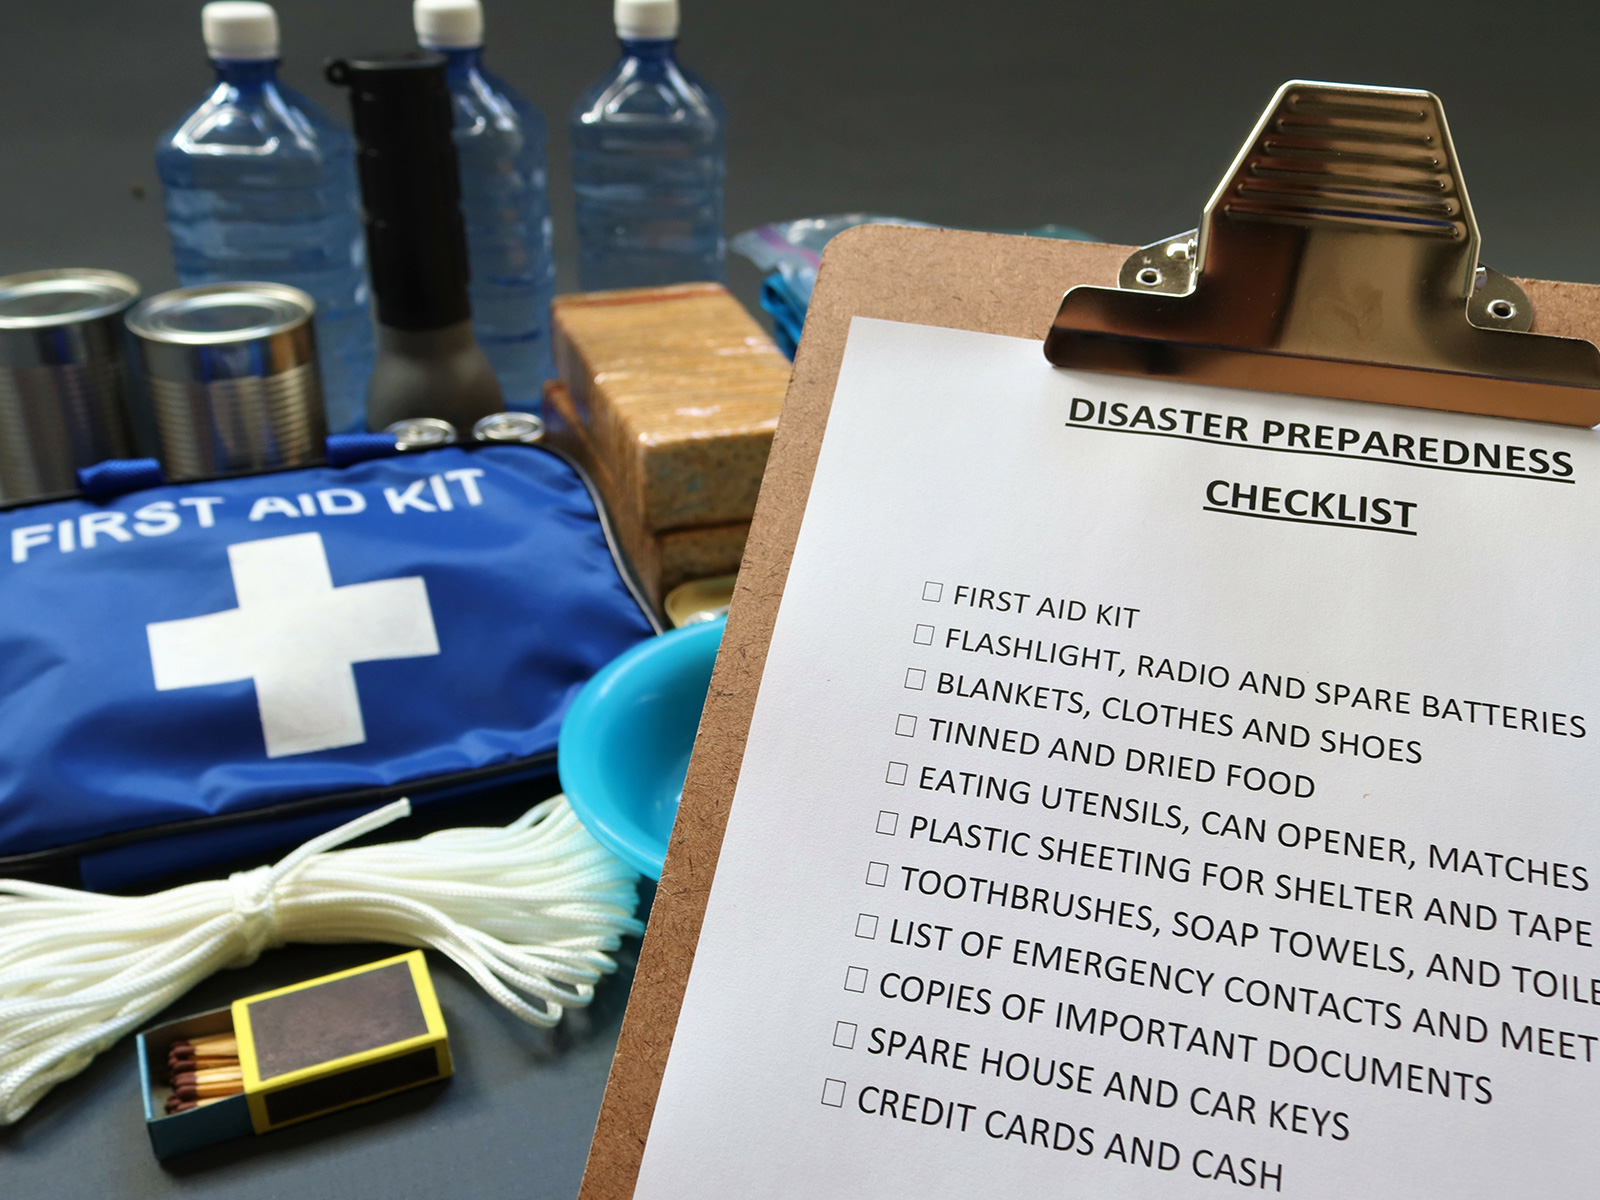 Disaster preparedness kit and first aid kit.